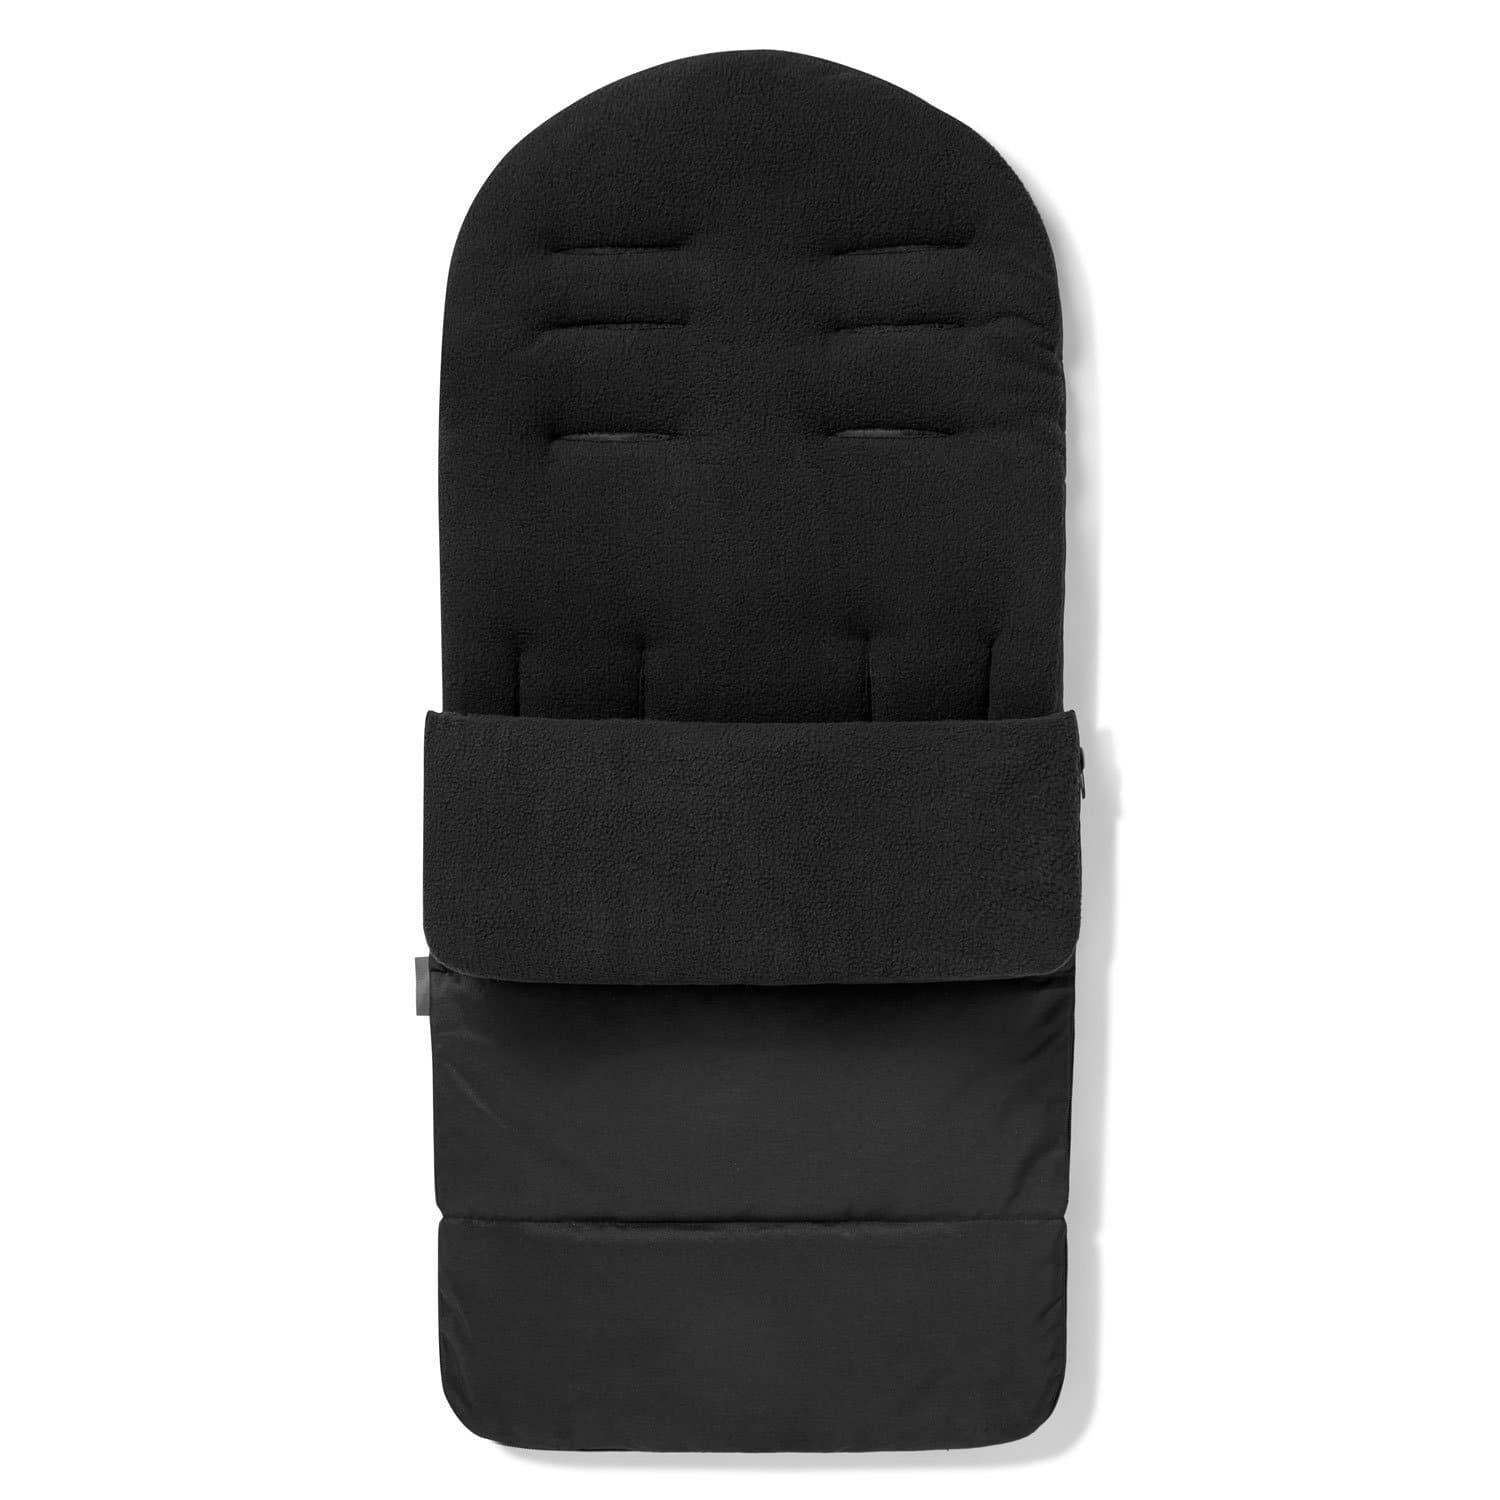 Premium Footmuff / Cosy Toes Compatible with NeoNato - Black Jack / Fits All Models | For Your Little One